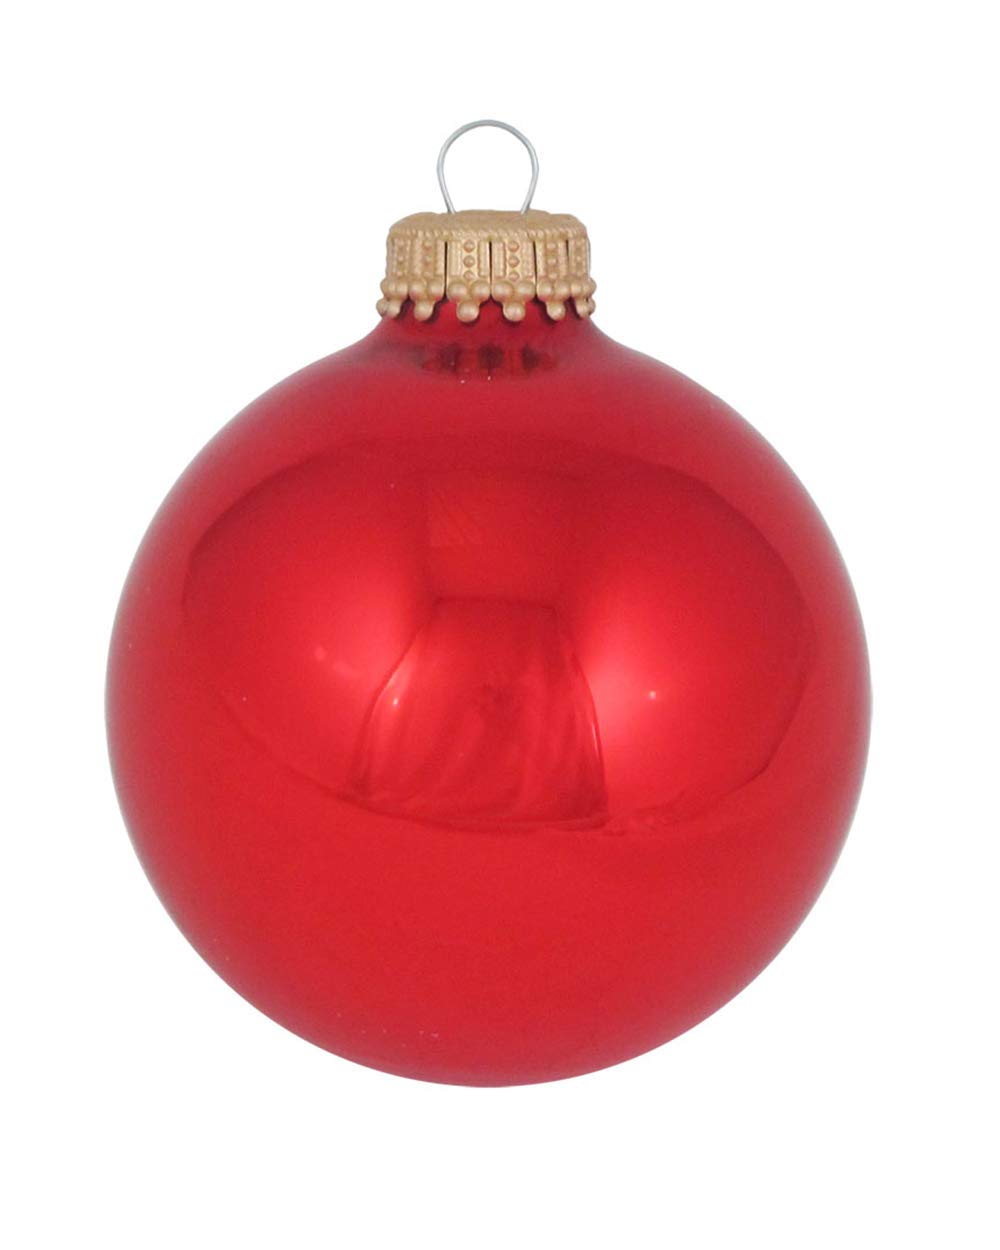 Glass Christmas Tree Ornaments - 67mm / 2.63" [8 Pieces] Designer Balls from Christmas By Krebs Seamless Hanging Holiday Decor (Candy Apple Red)